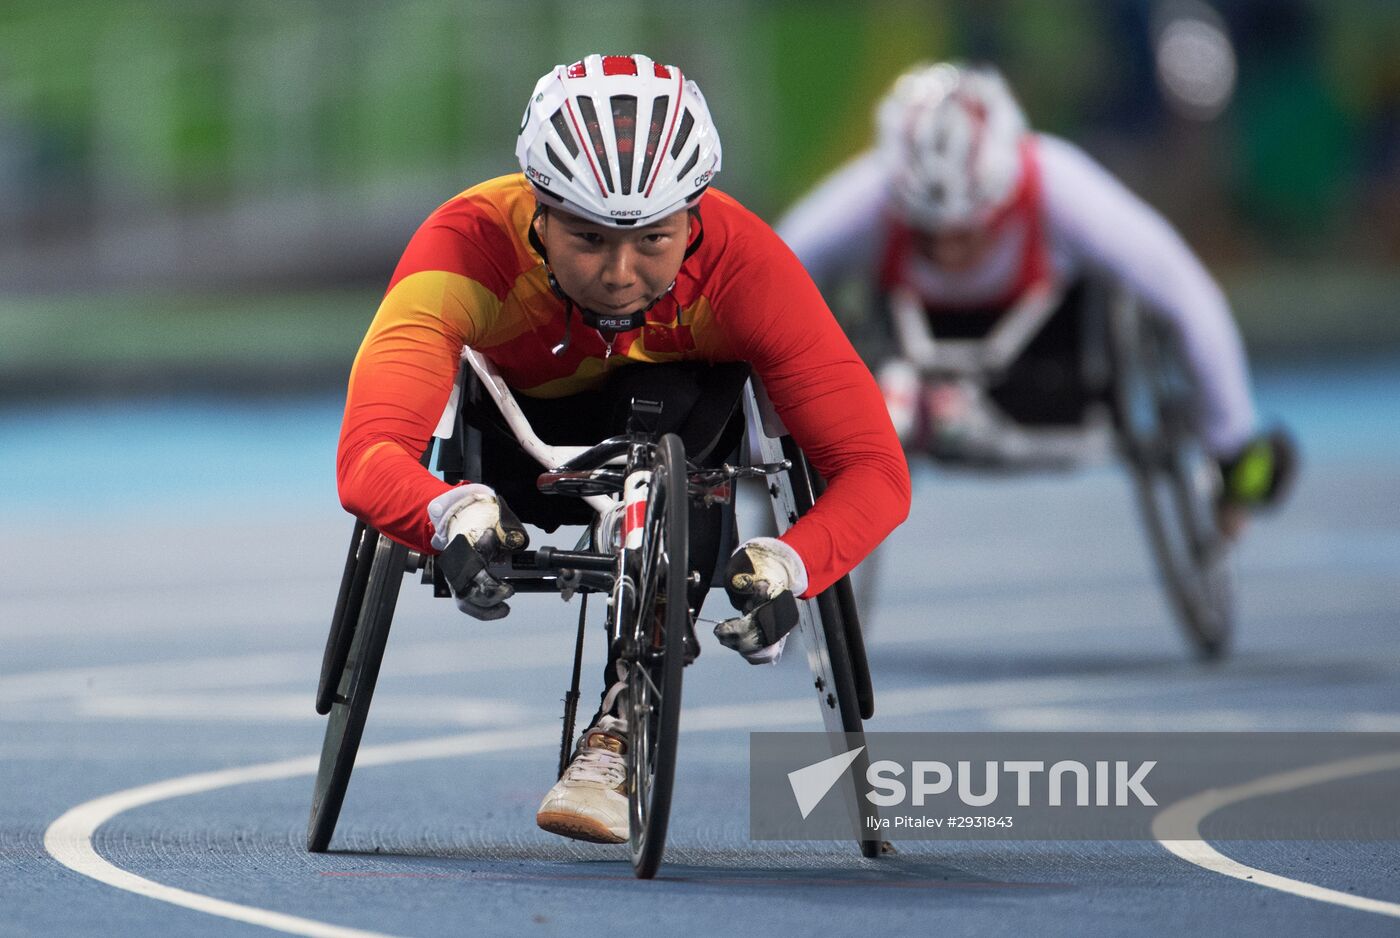 2016 Summer Paralympic Games. Day One